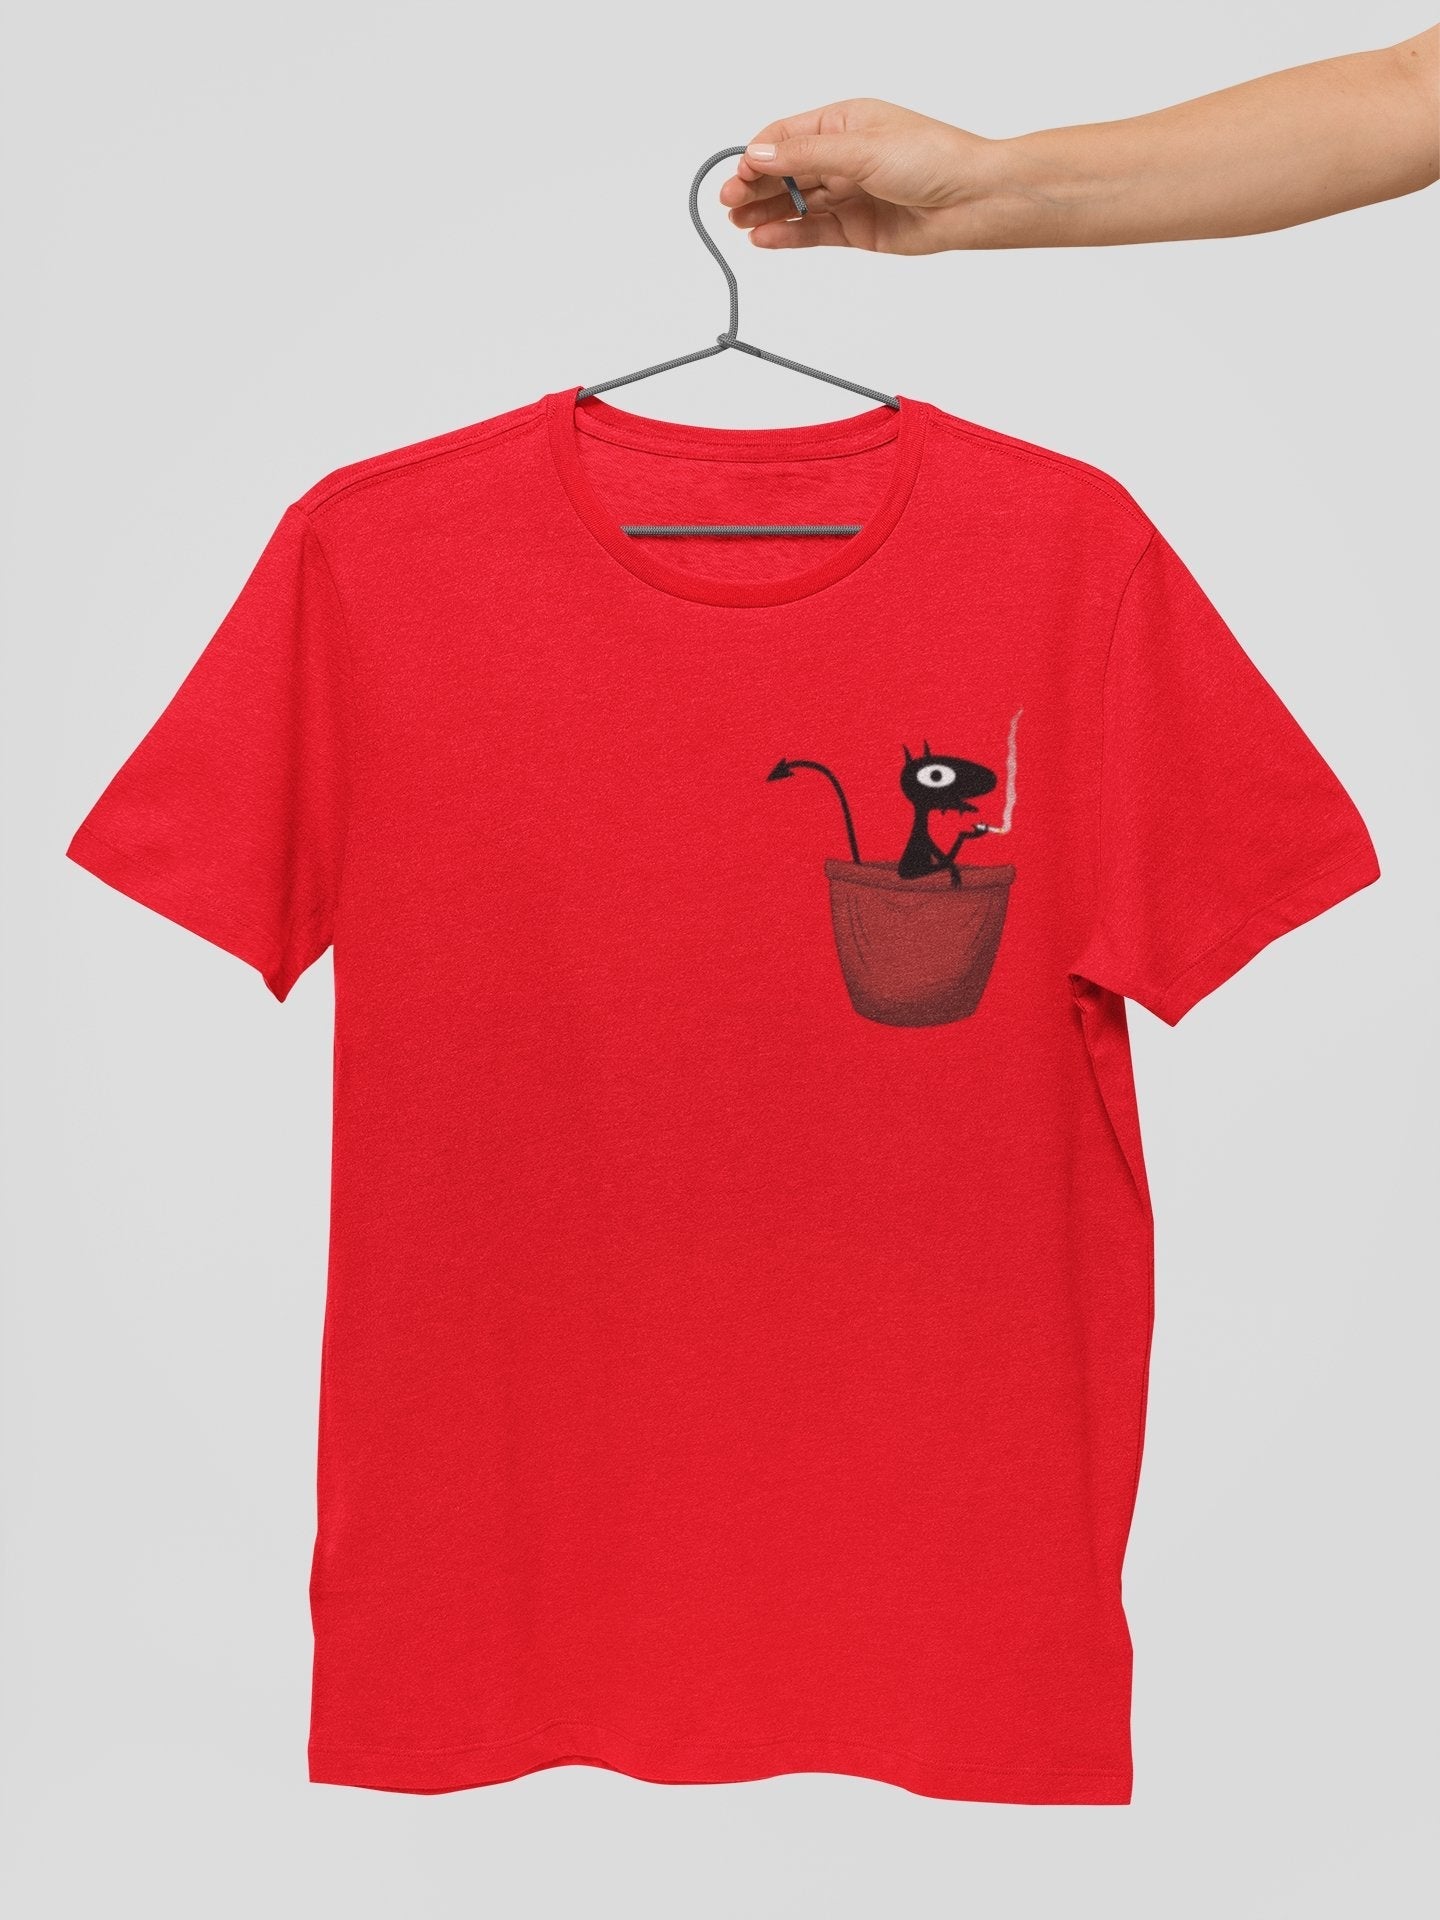 Lucifer the Demon in Hot Pocket Tee - Insane Tees